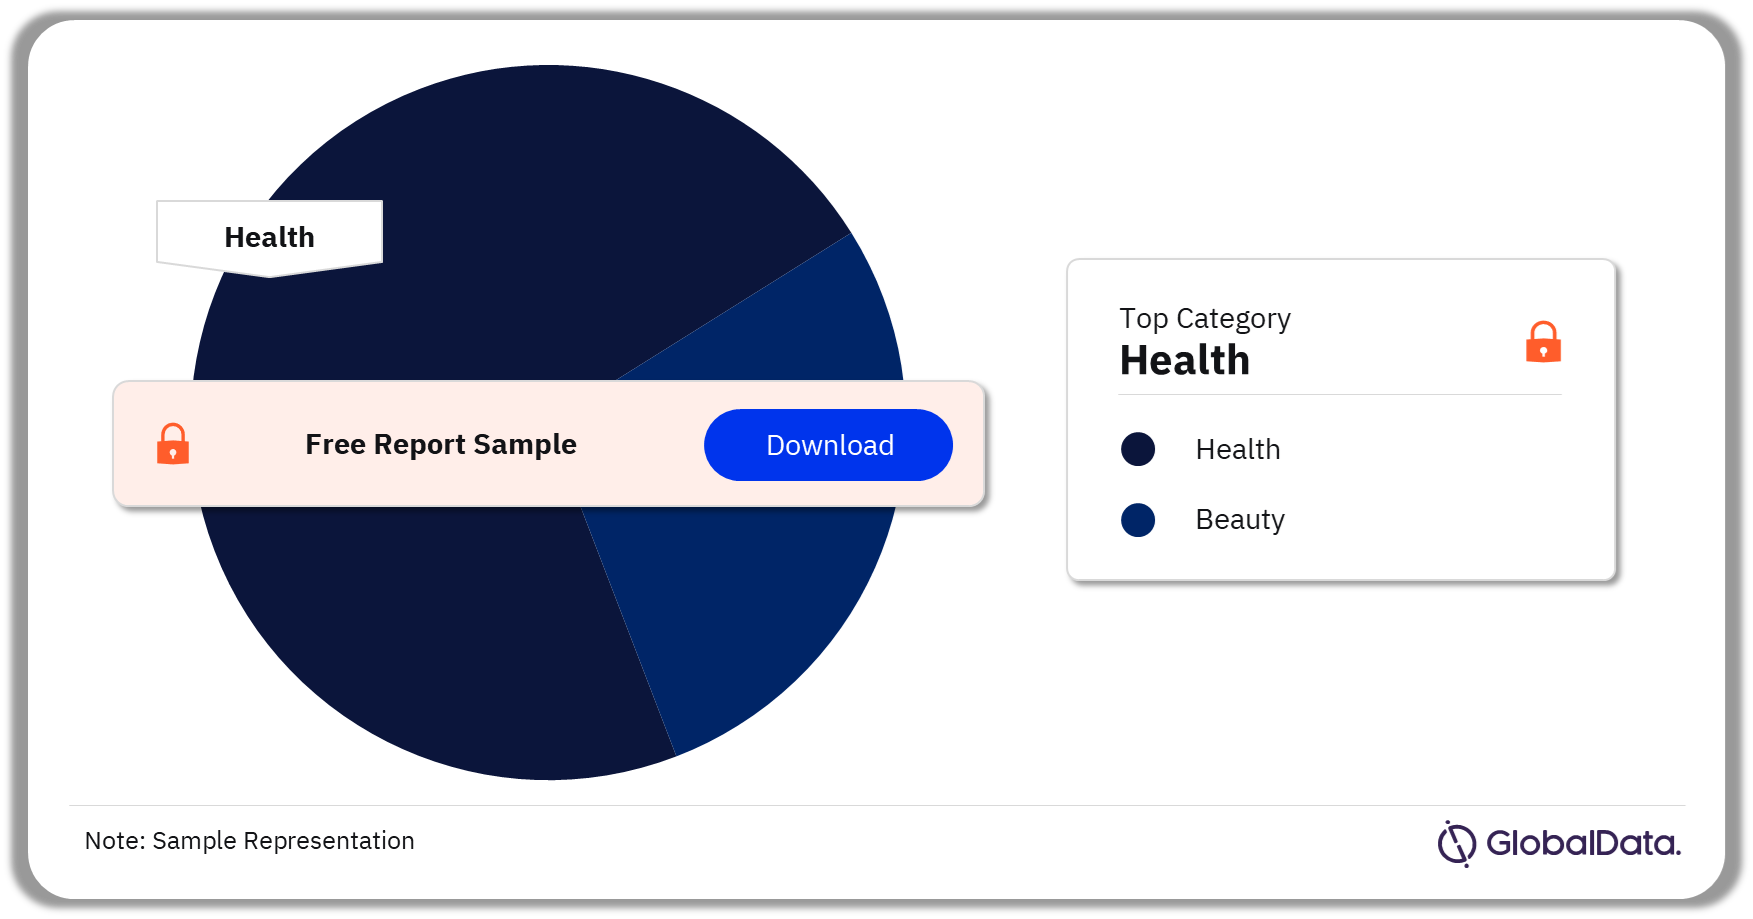 United Kingdom Health and Beauty Market Analysis by Categories, 2022 (%)